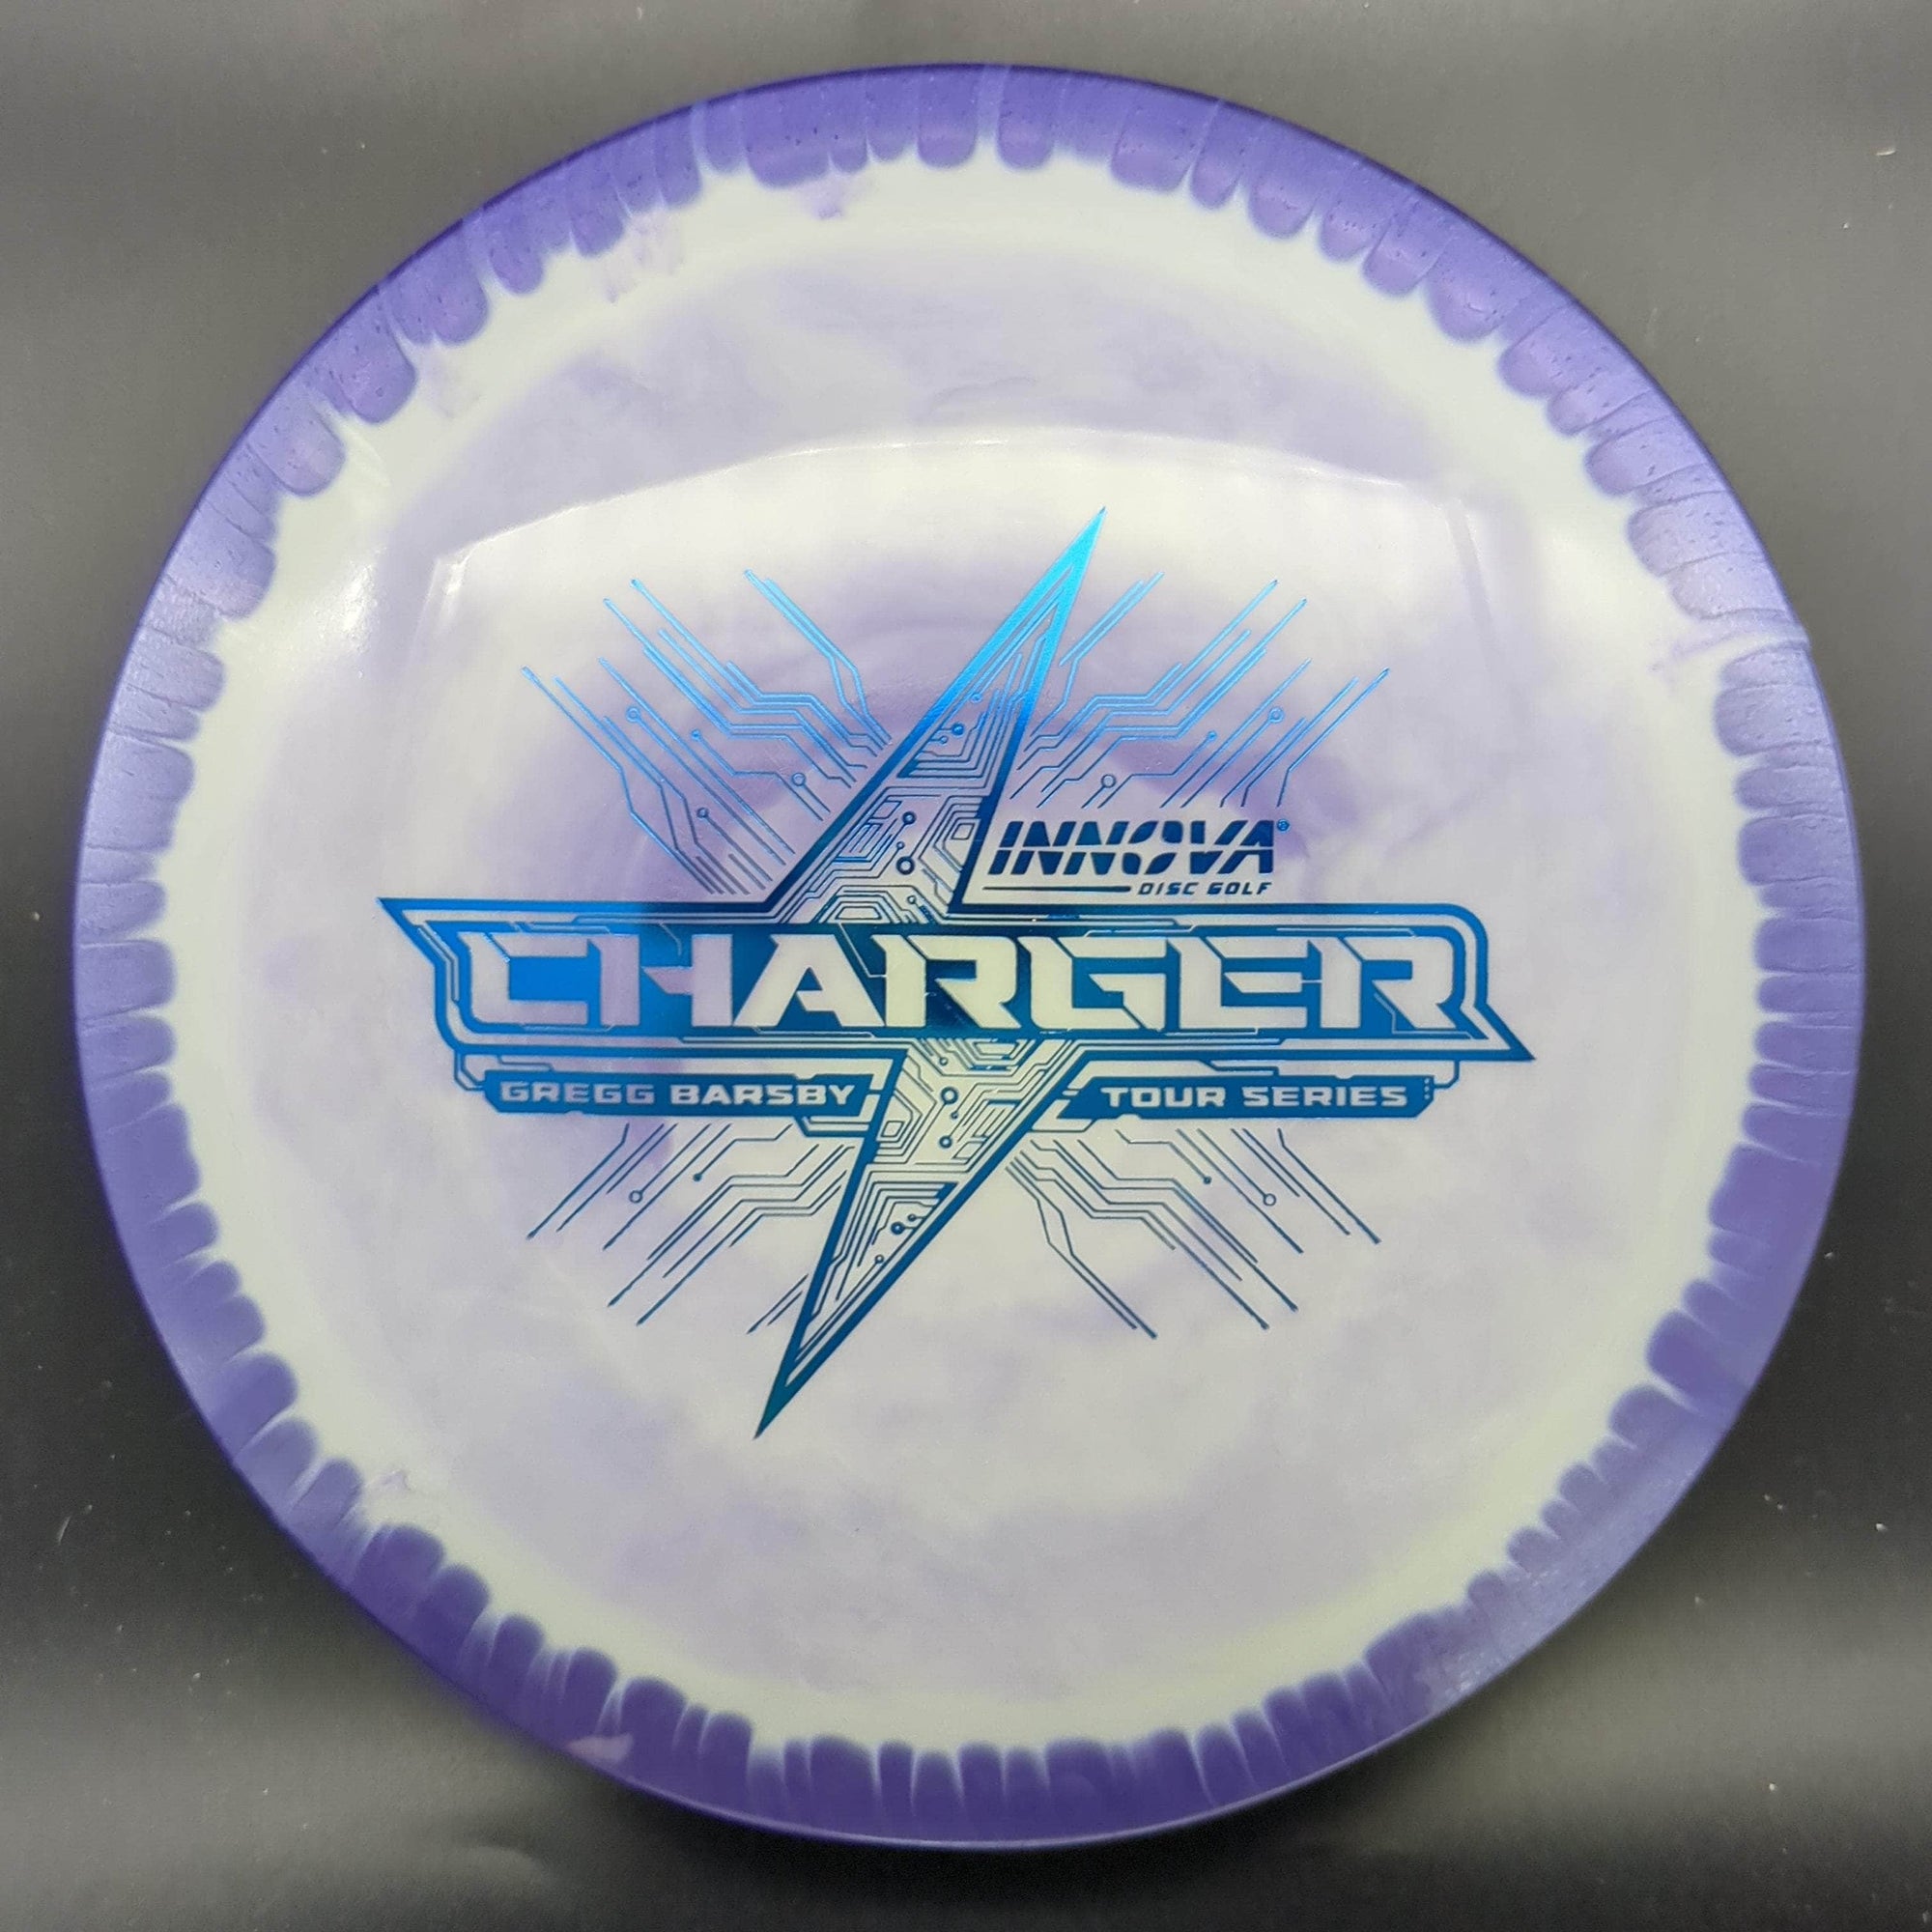 Innova Distance Driver Purple Blue Stamp 175g Charger, Halo Star, Gregg Barsby Tour Series